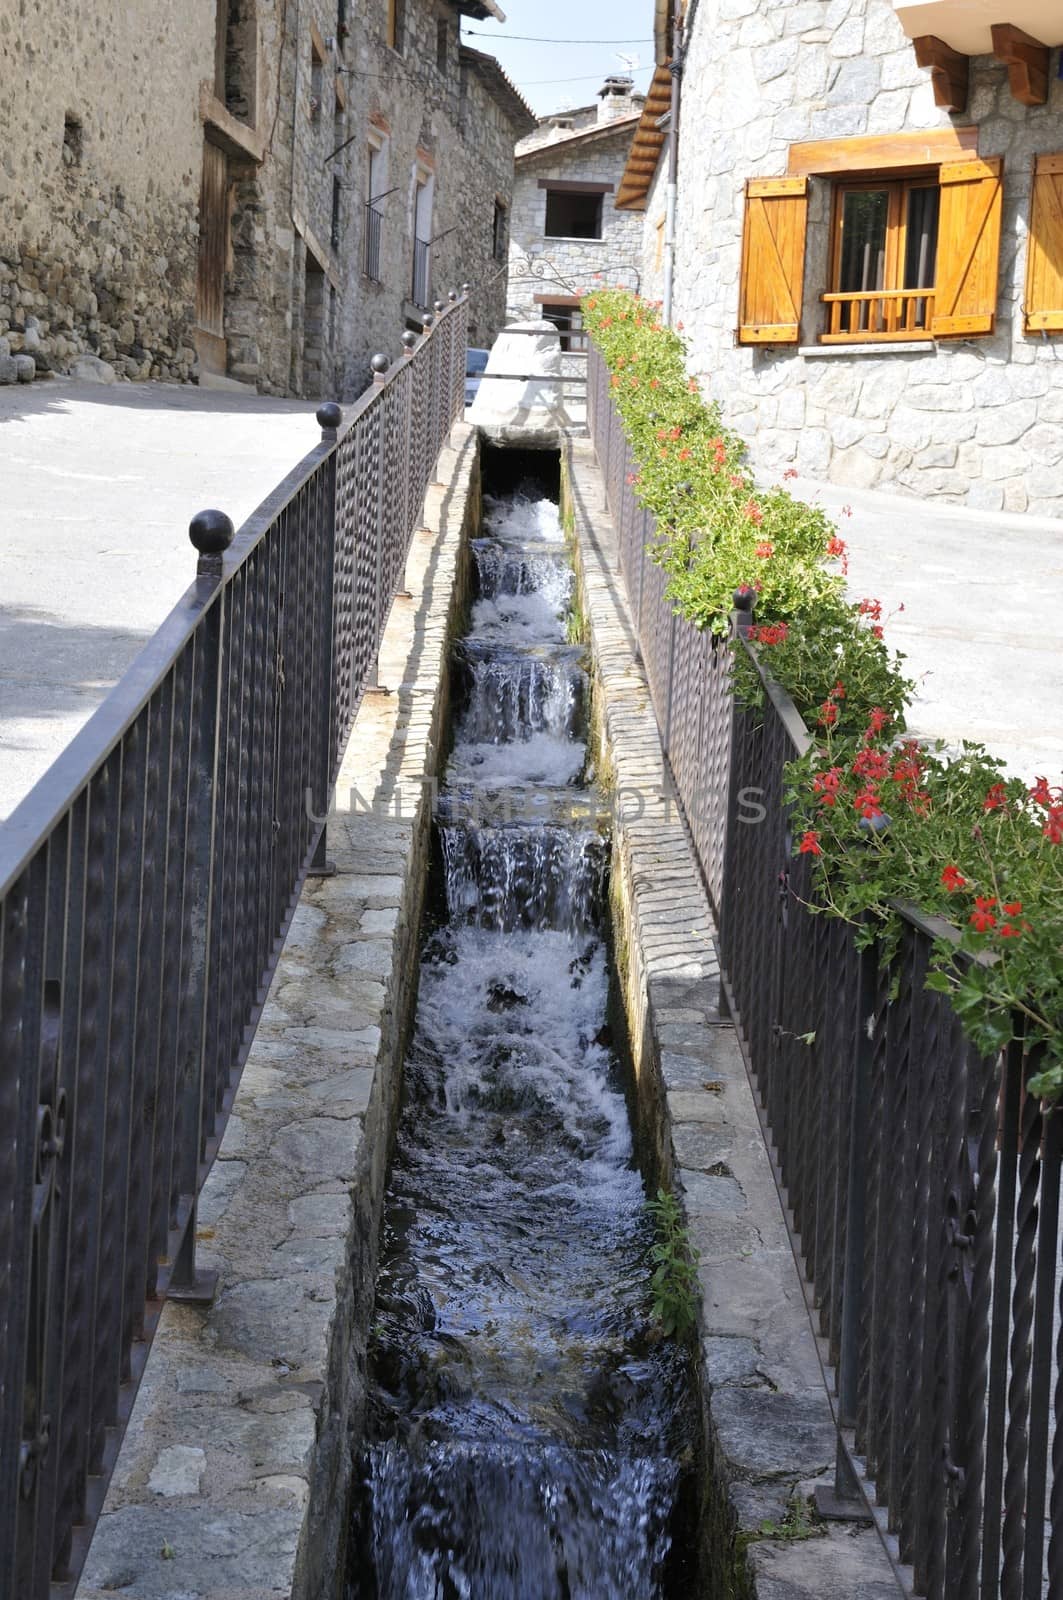 stream crossing houses to irrigate